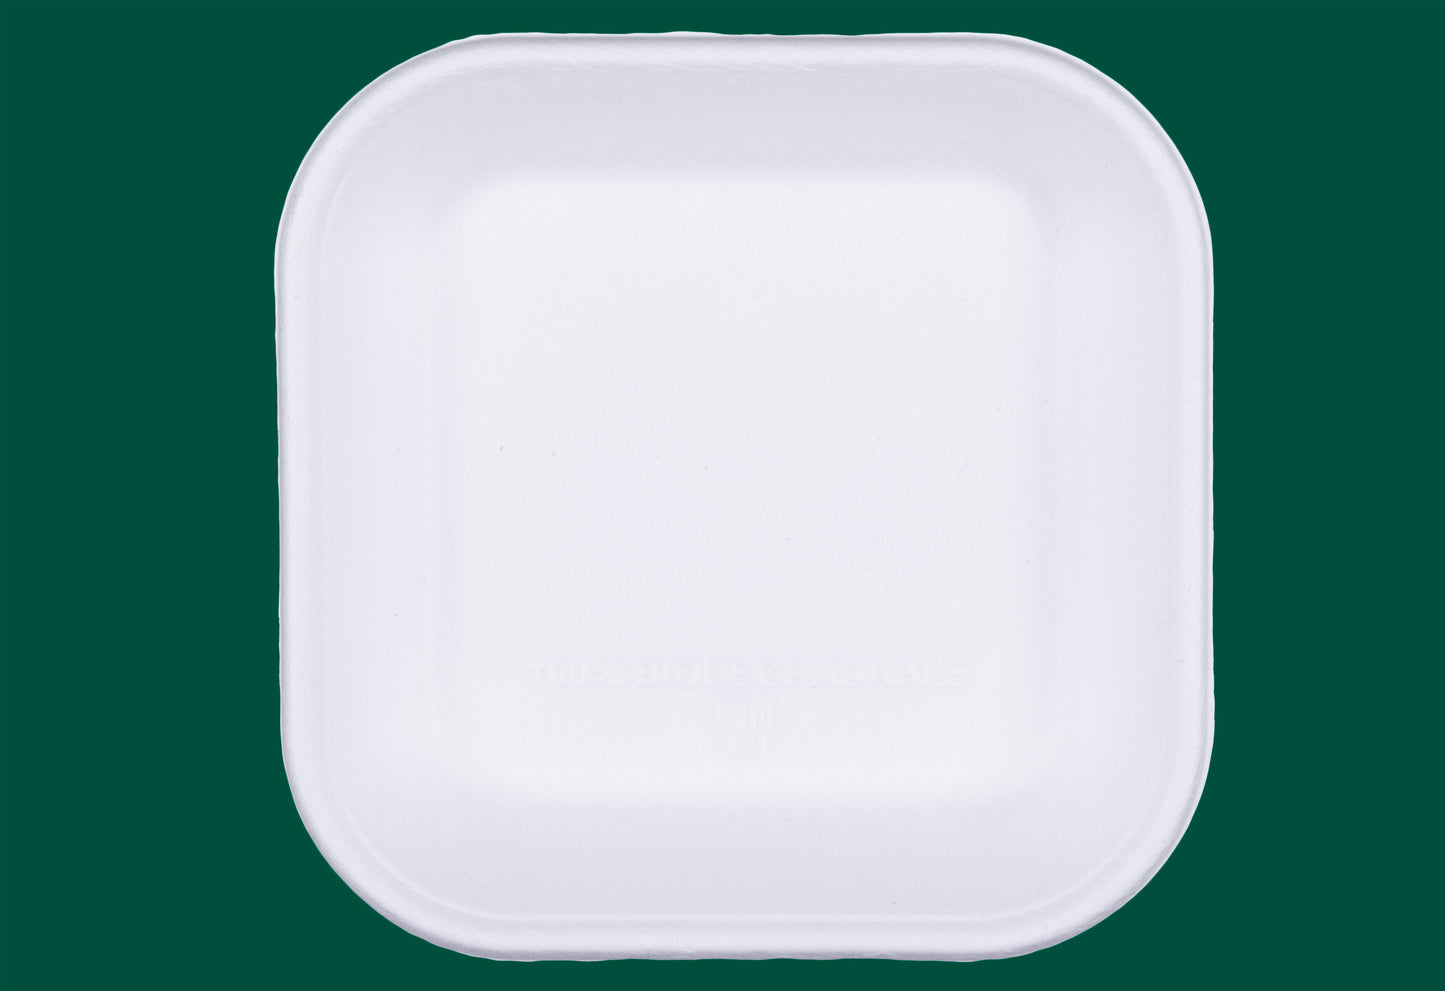 5-Inch-Square-Trays-Compostable-Sugarcane-Bagasse-Tray-Plates